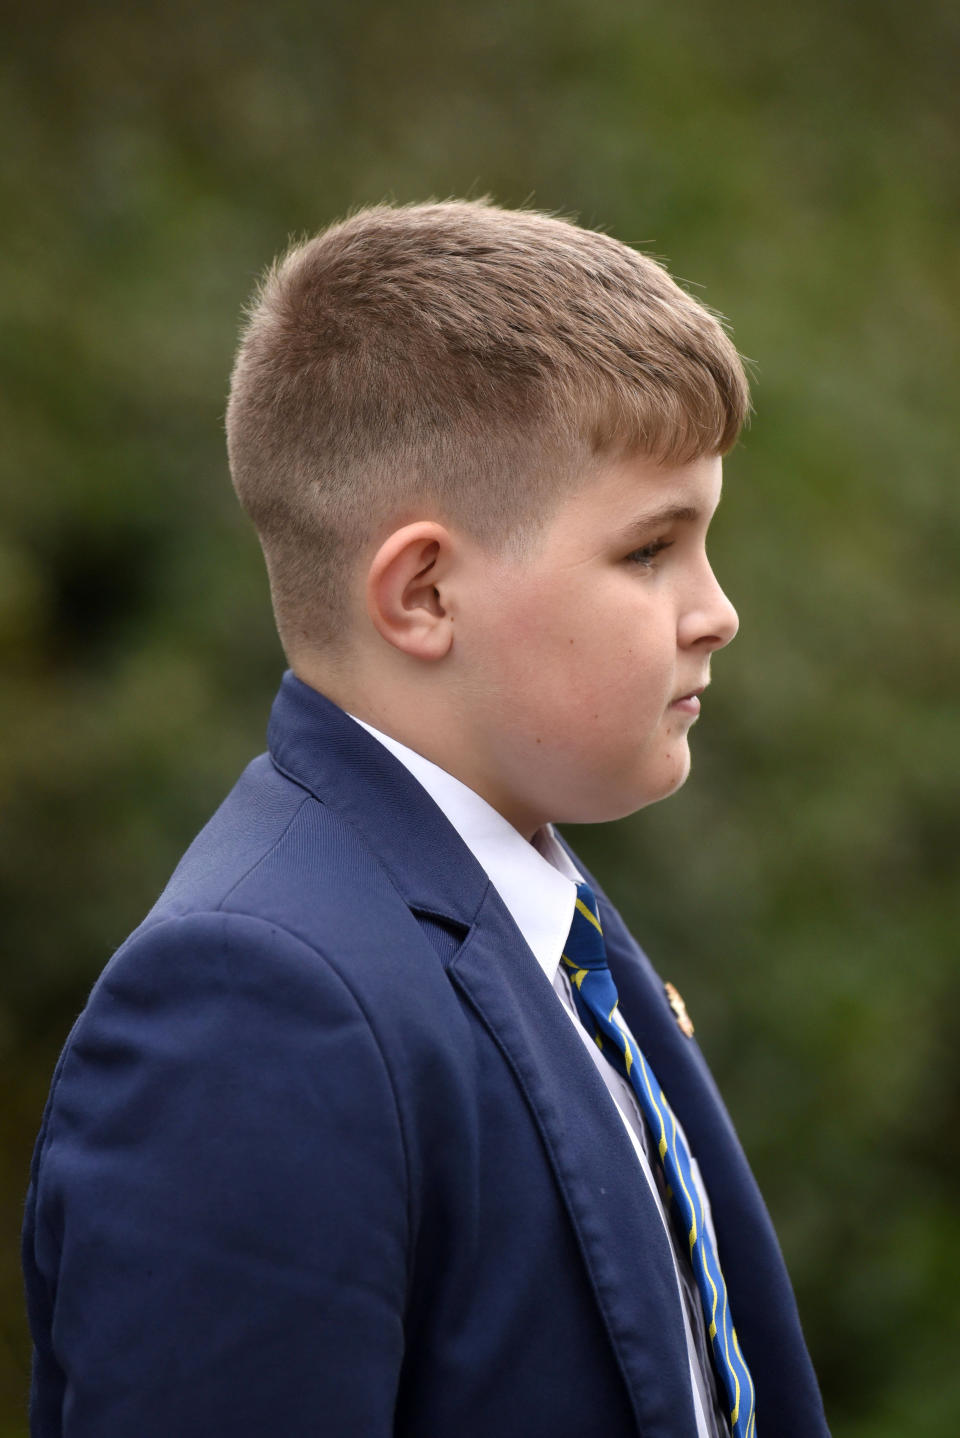 Jason Kirkbride, 14, had a number one haircut on the sides of his head. [Photo: SWNS]